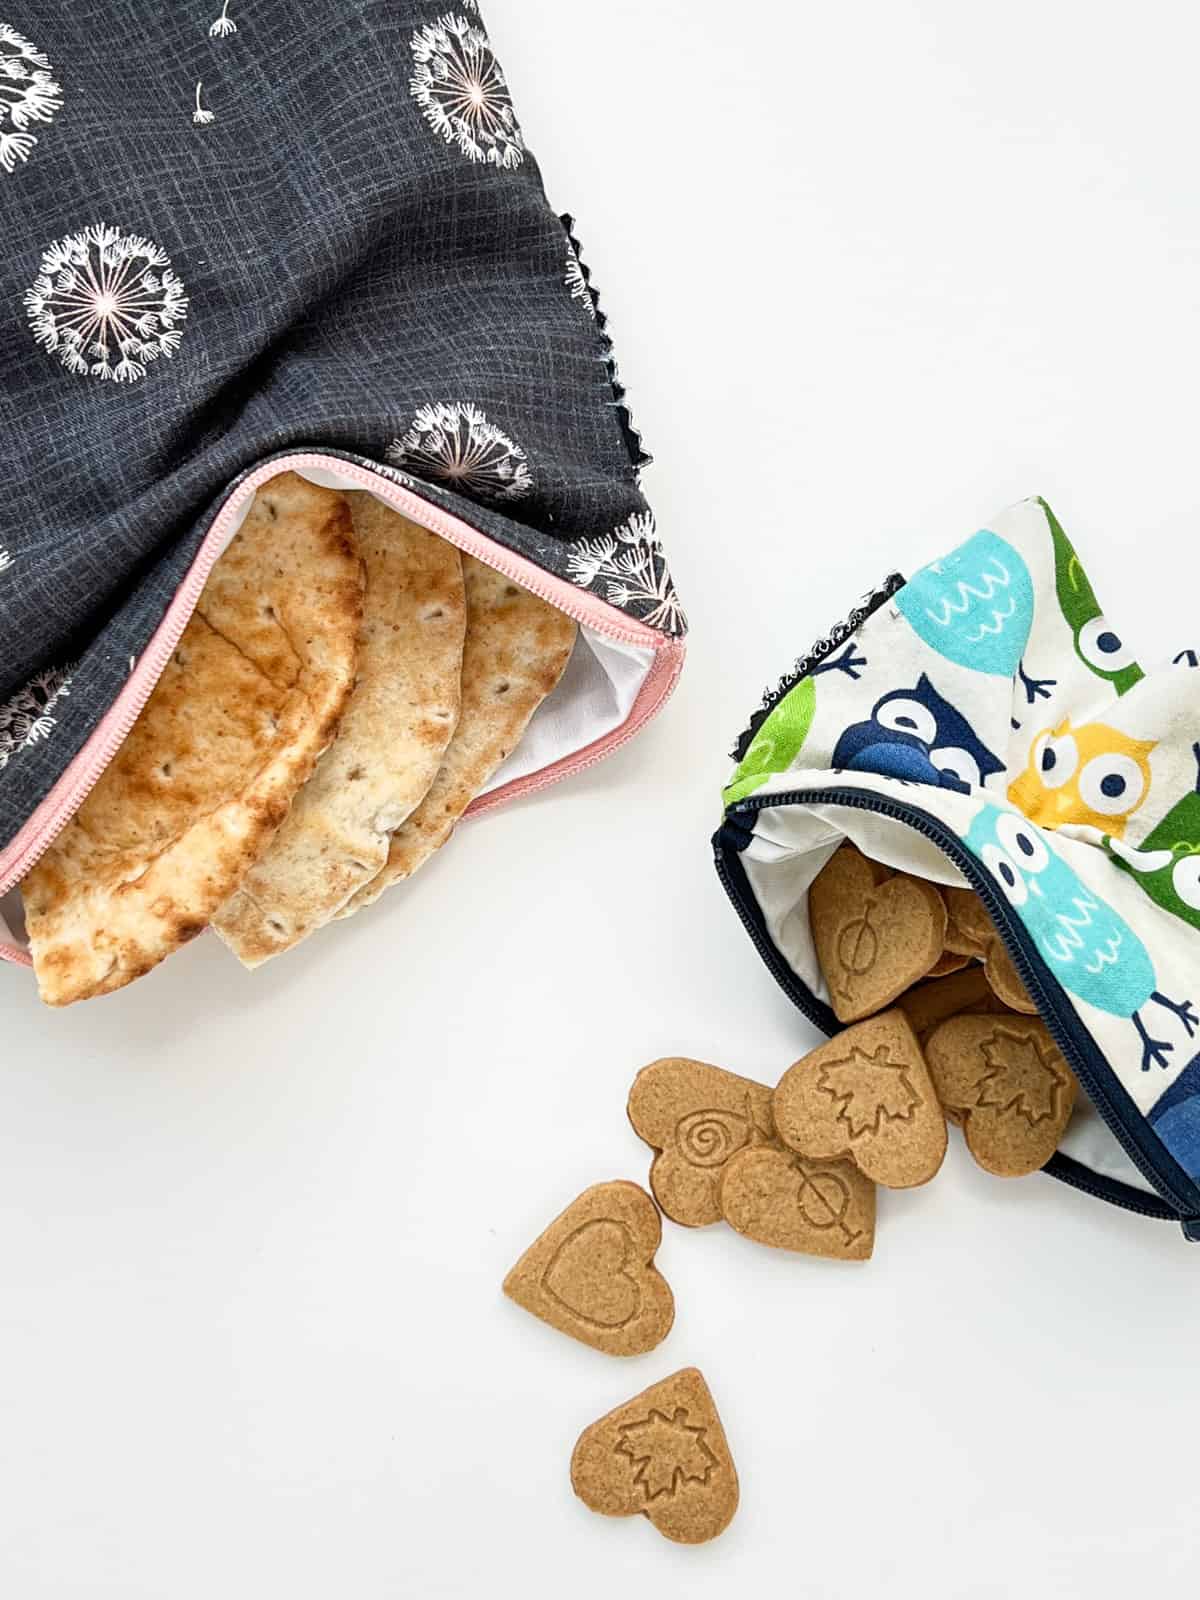 An image of two sizes of reusable fabric pouches that are used for food and snacks; on contains pita bread and the other contains small heart shaped cookies.